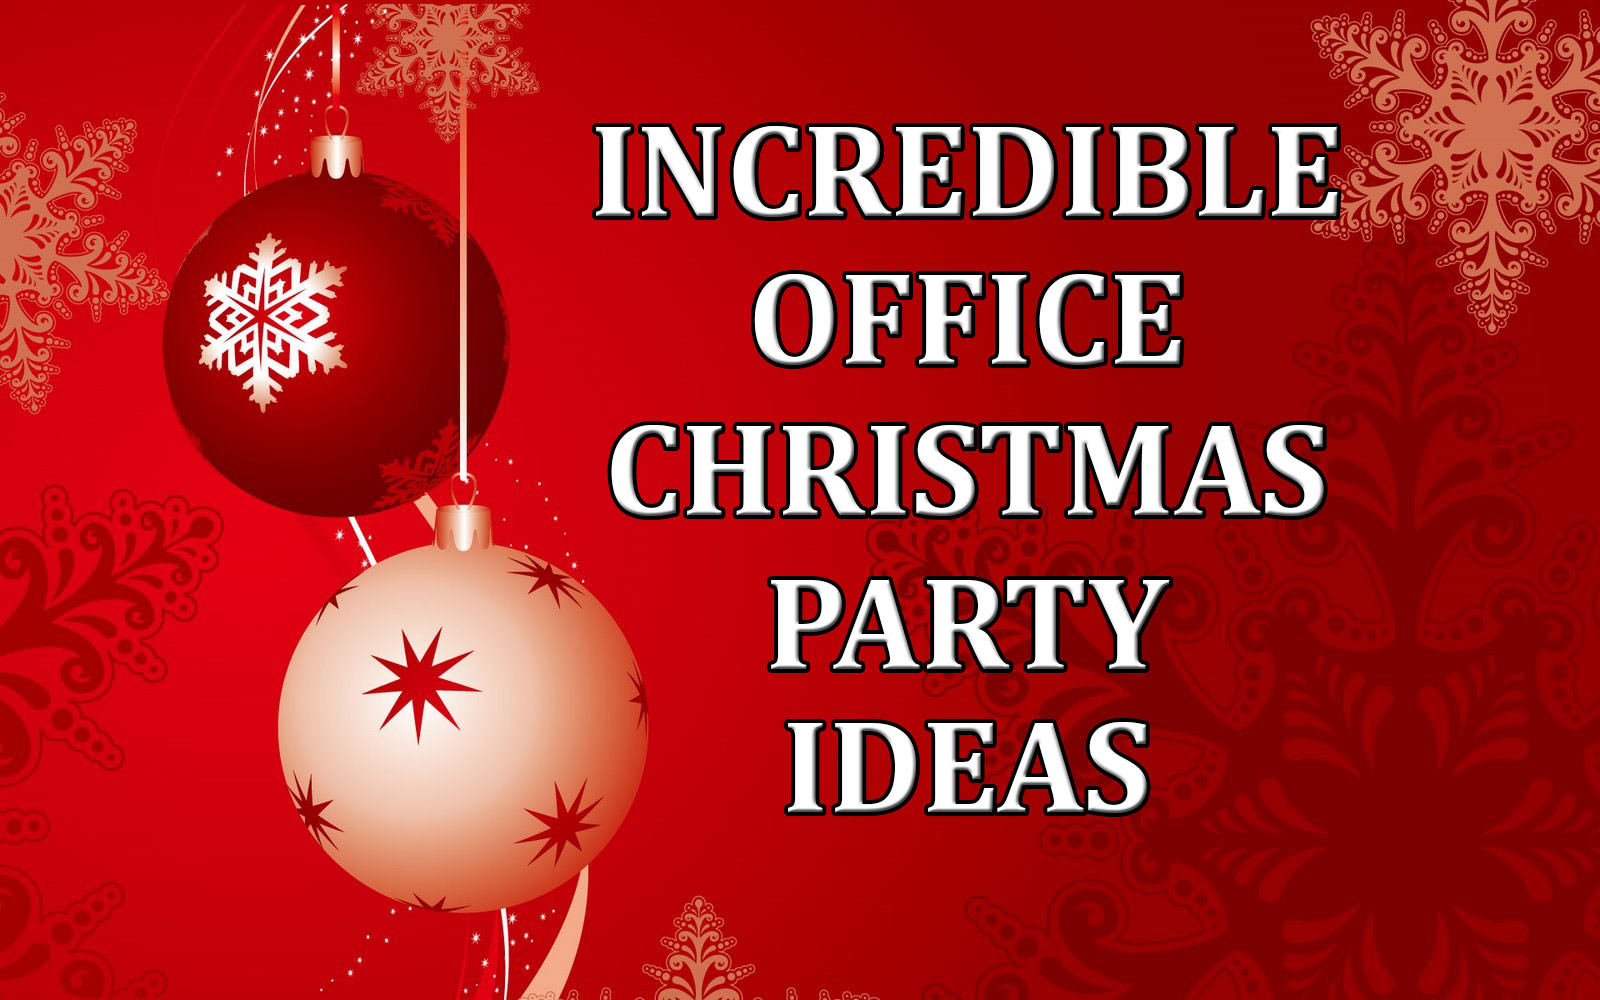 Holiday Christmas Party Ideas Work
 Incredible fice Christmas Party Ideas edy Ventriloquist